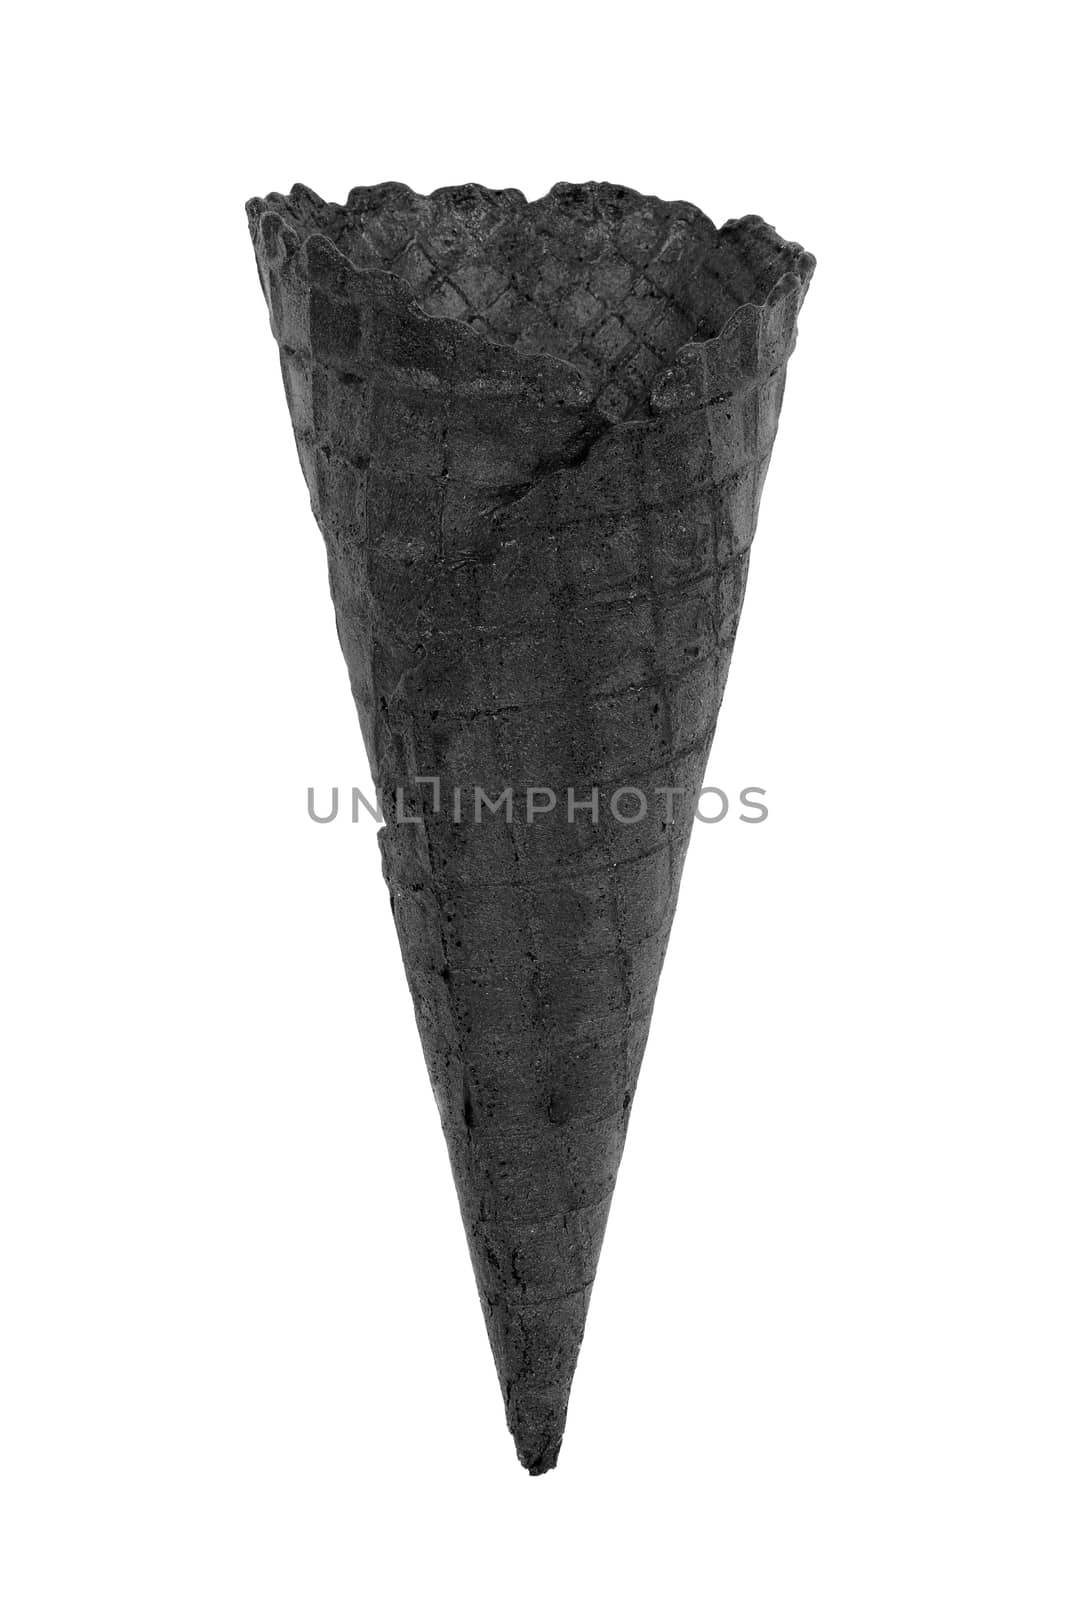 Black empty ice cream cone isolated on white background with clipping path